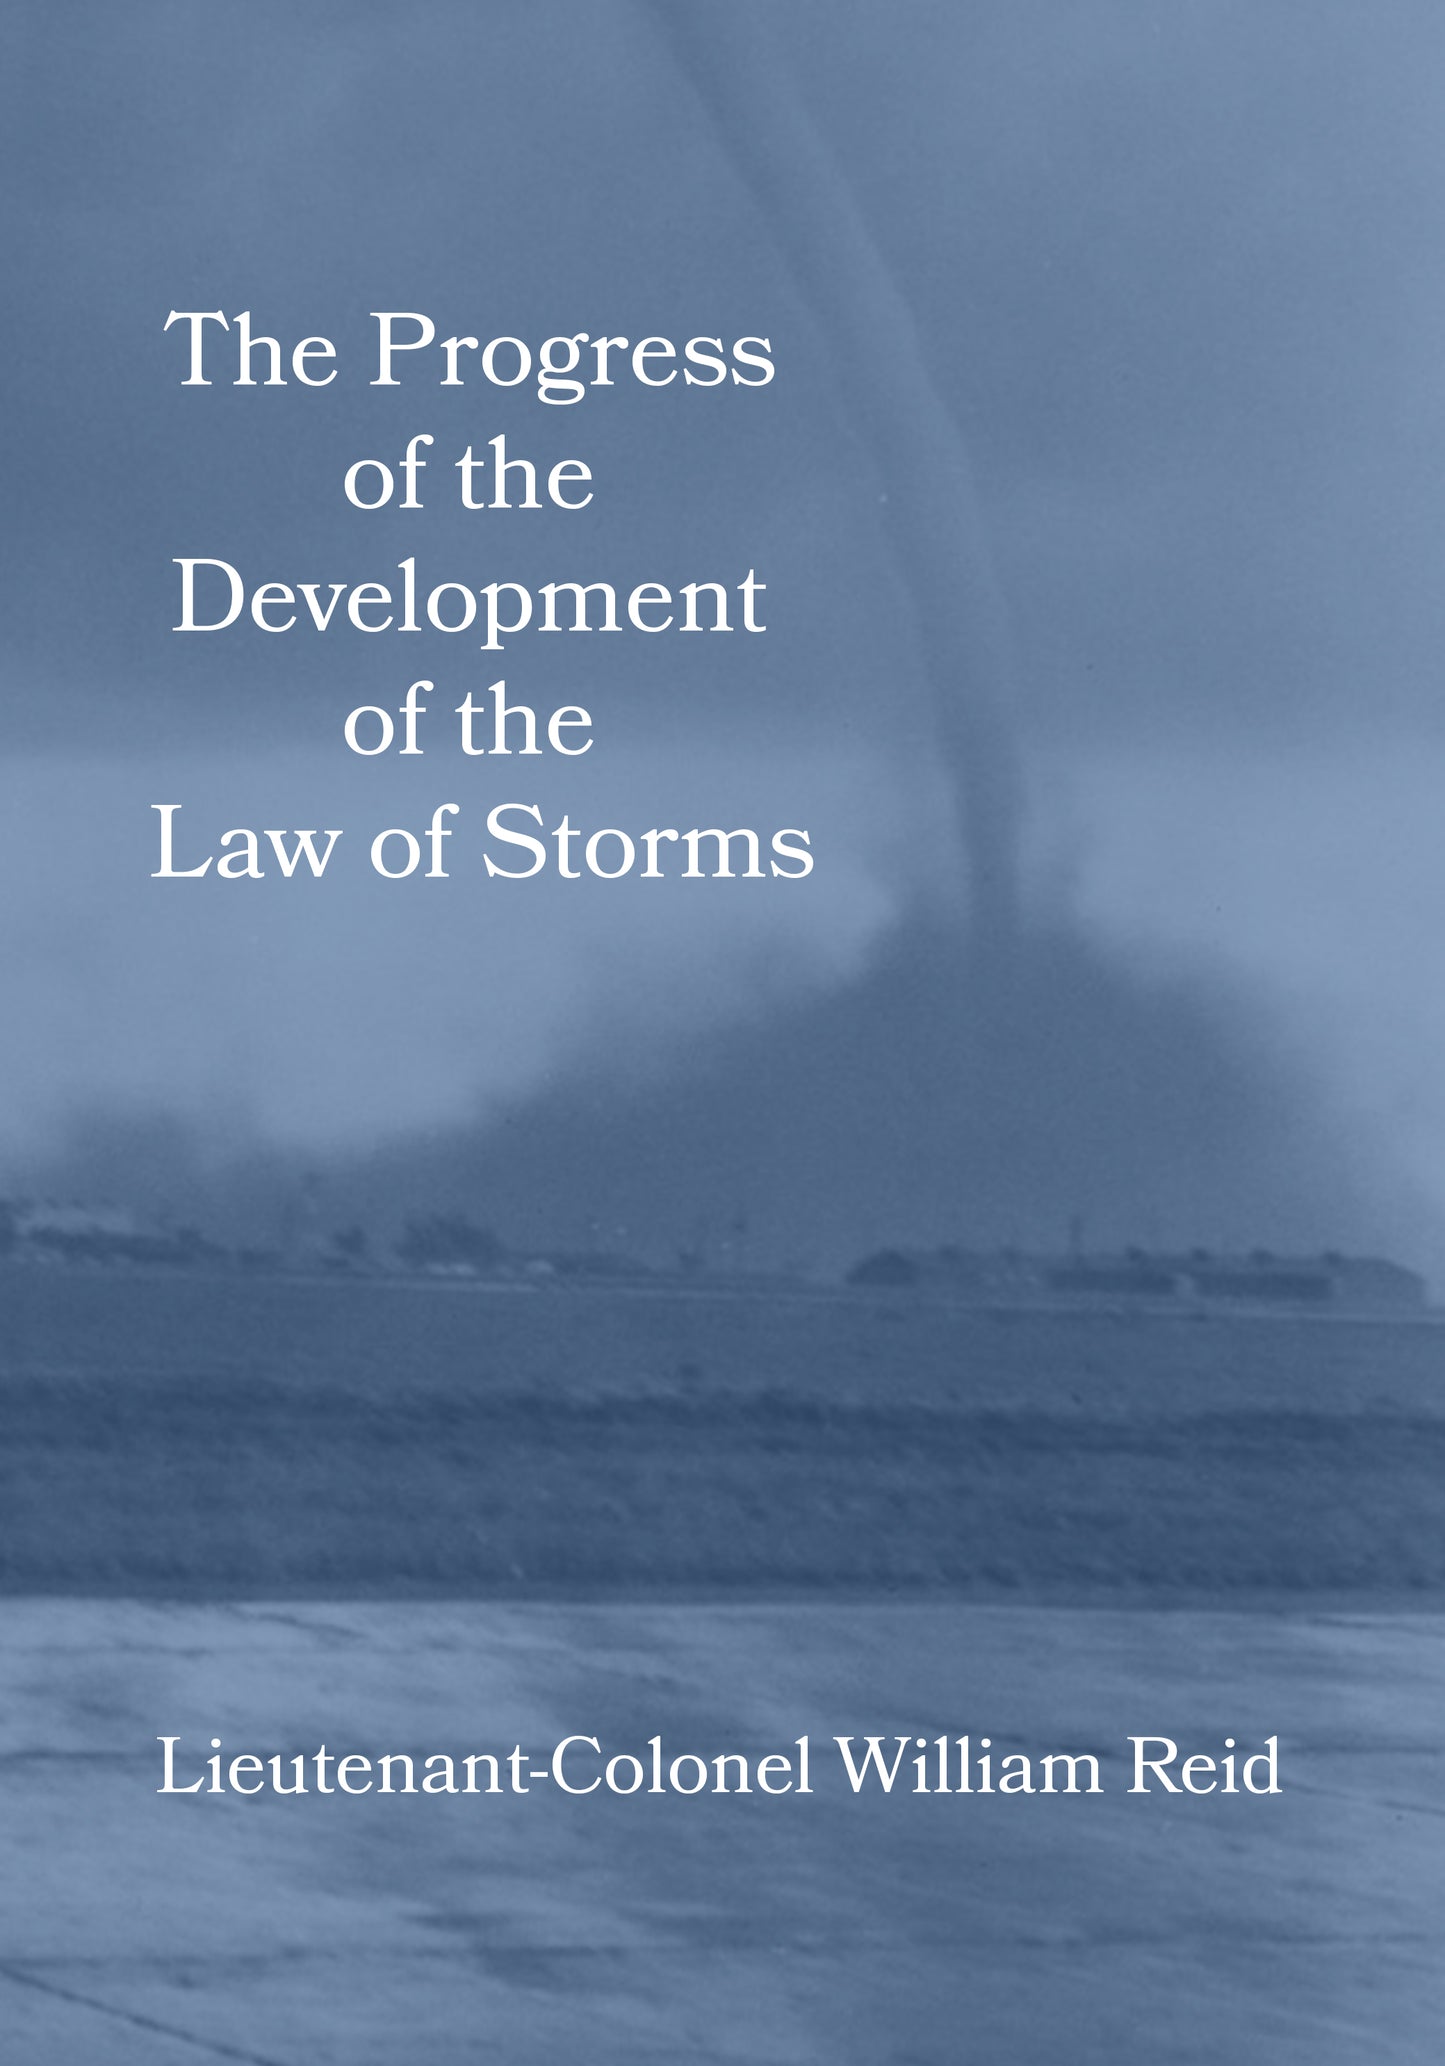 The Progress of the Development of The Law of Storms